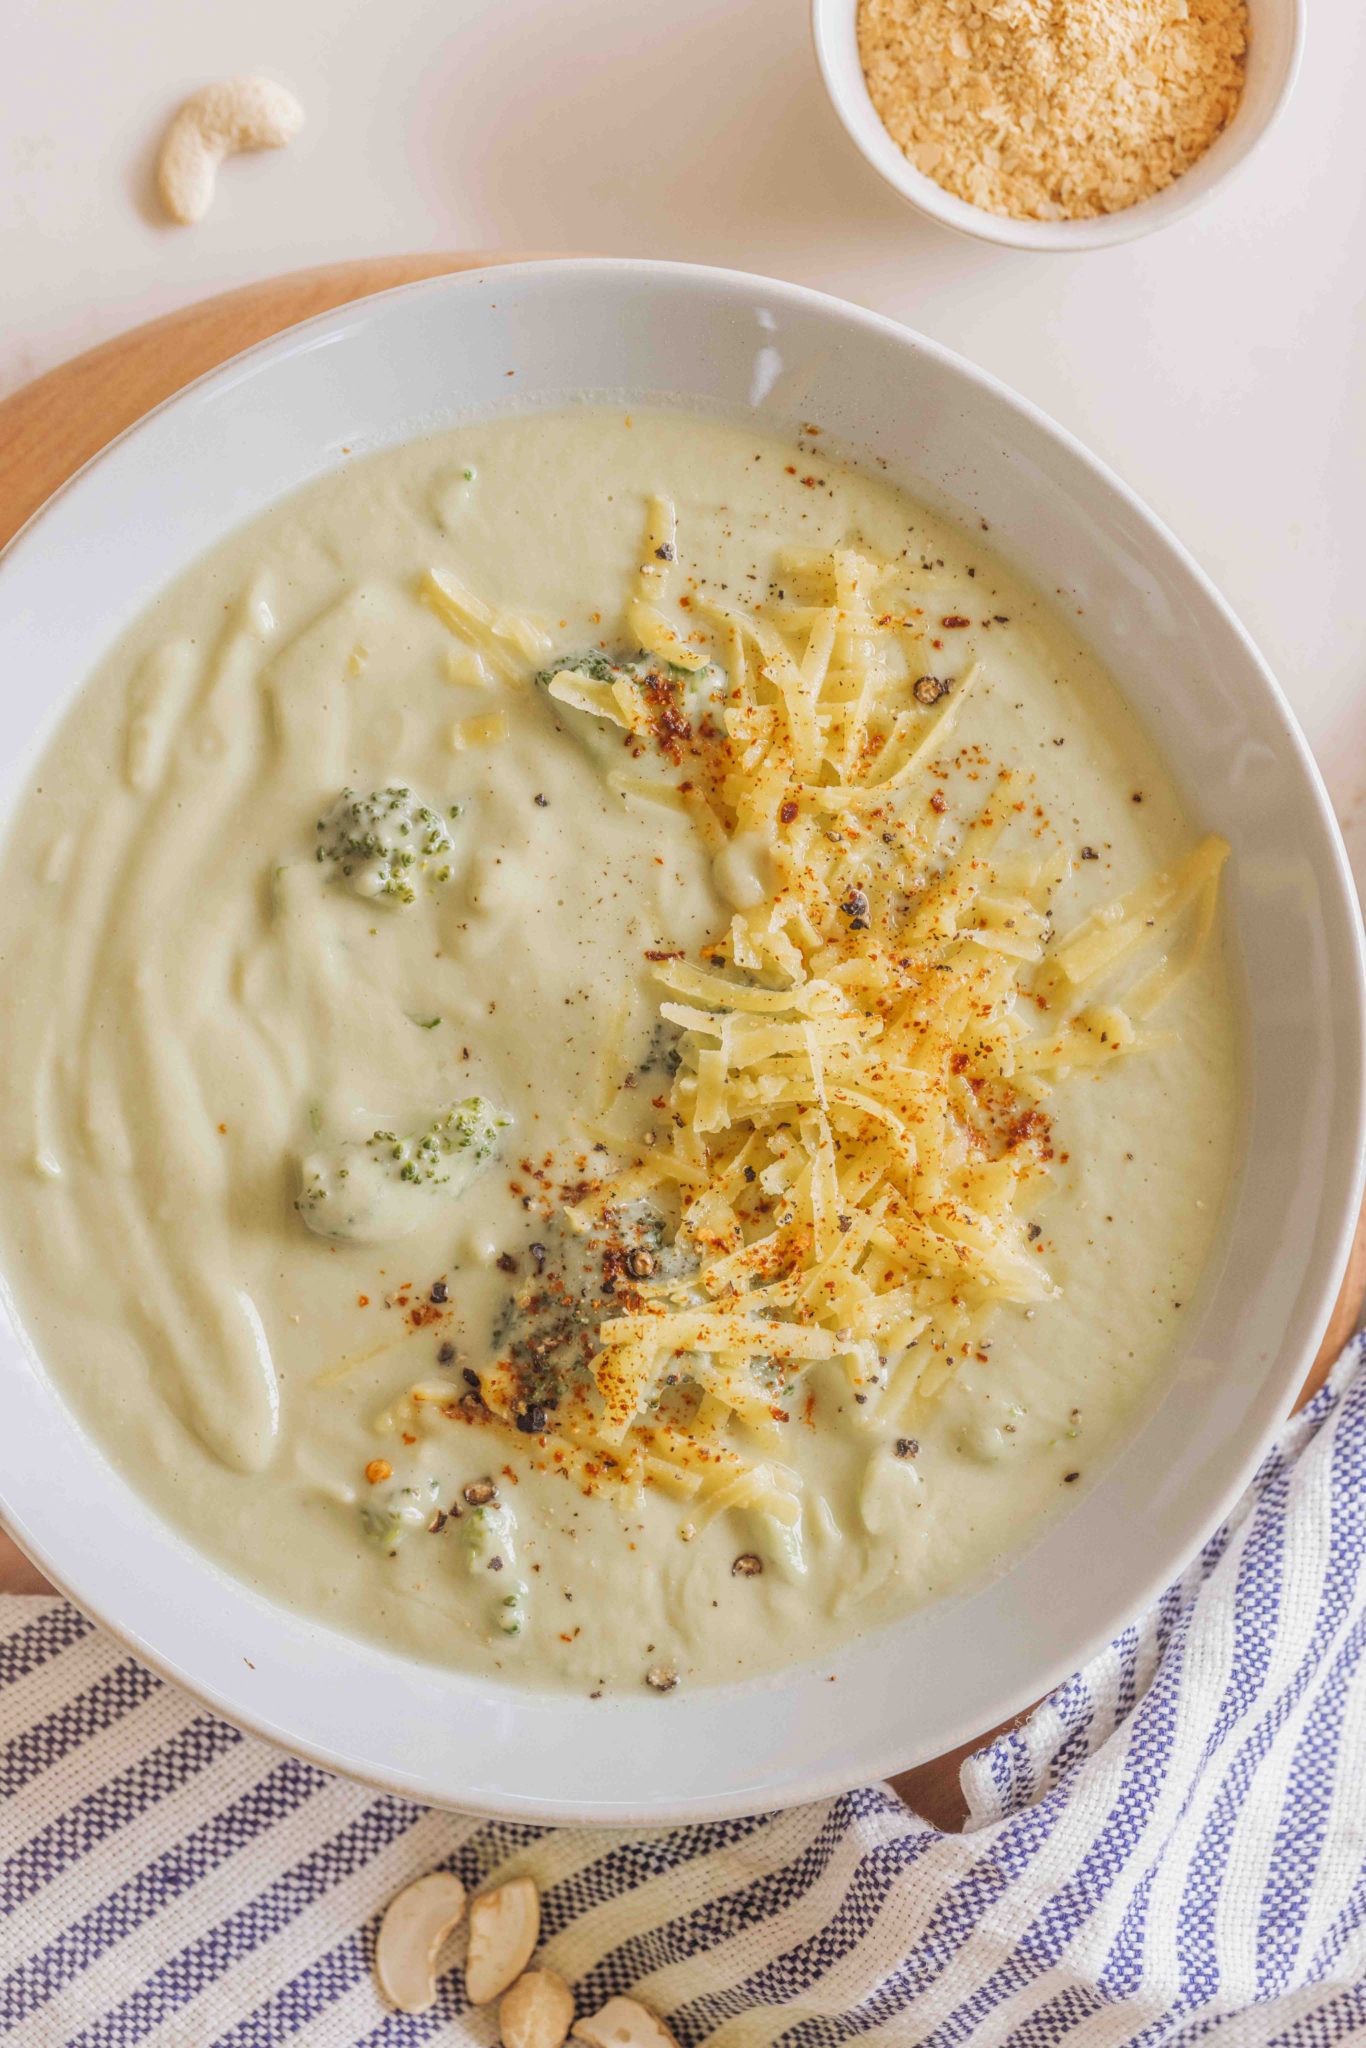 Woman (Buffy Ellen Gill) holding a bowl of creamy broccoli soup, topped with grated cheese, cracked black pepper and red chilli flakes.